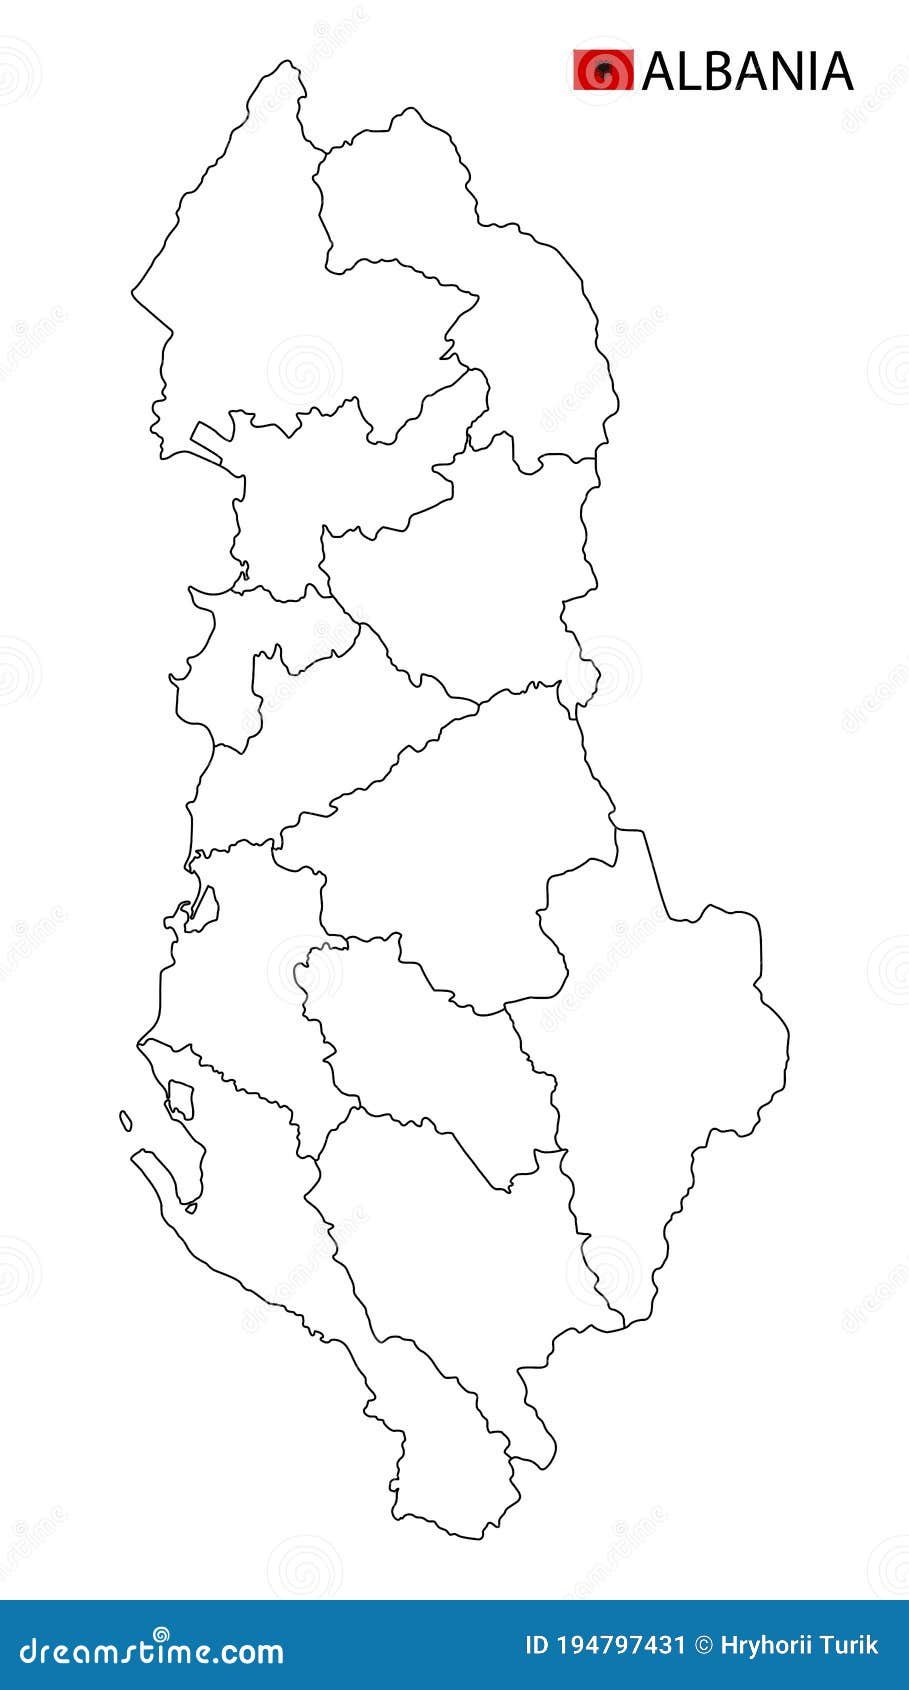 Albania Map Black And White Detailed Outline Regions Of The Country